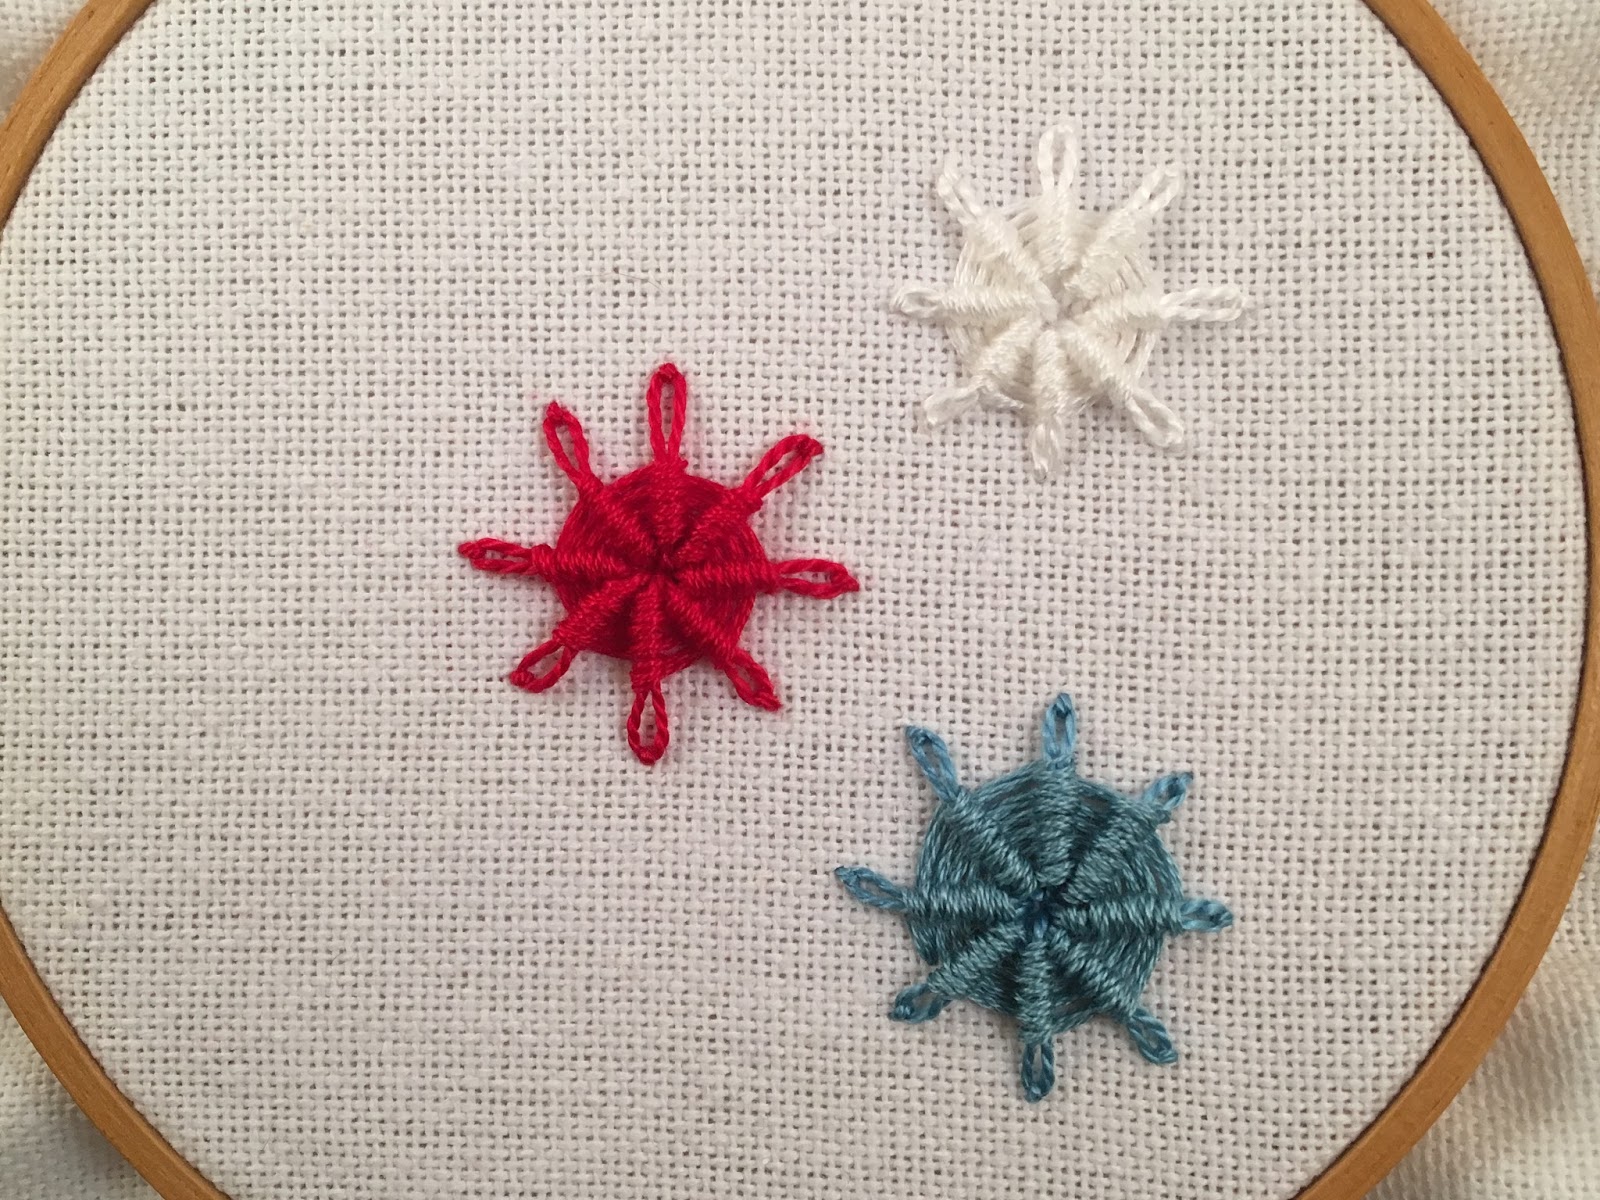 Whipped Lazy Daisy stitch, a tutorial by Michelle for Mooshiestitch Monday on Feeling Stitchy